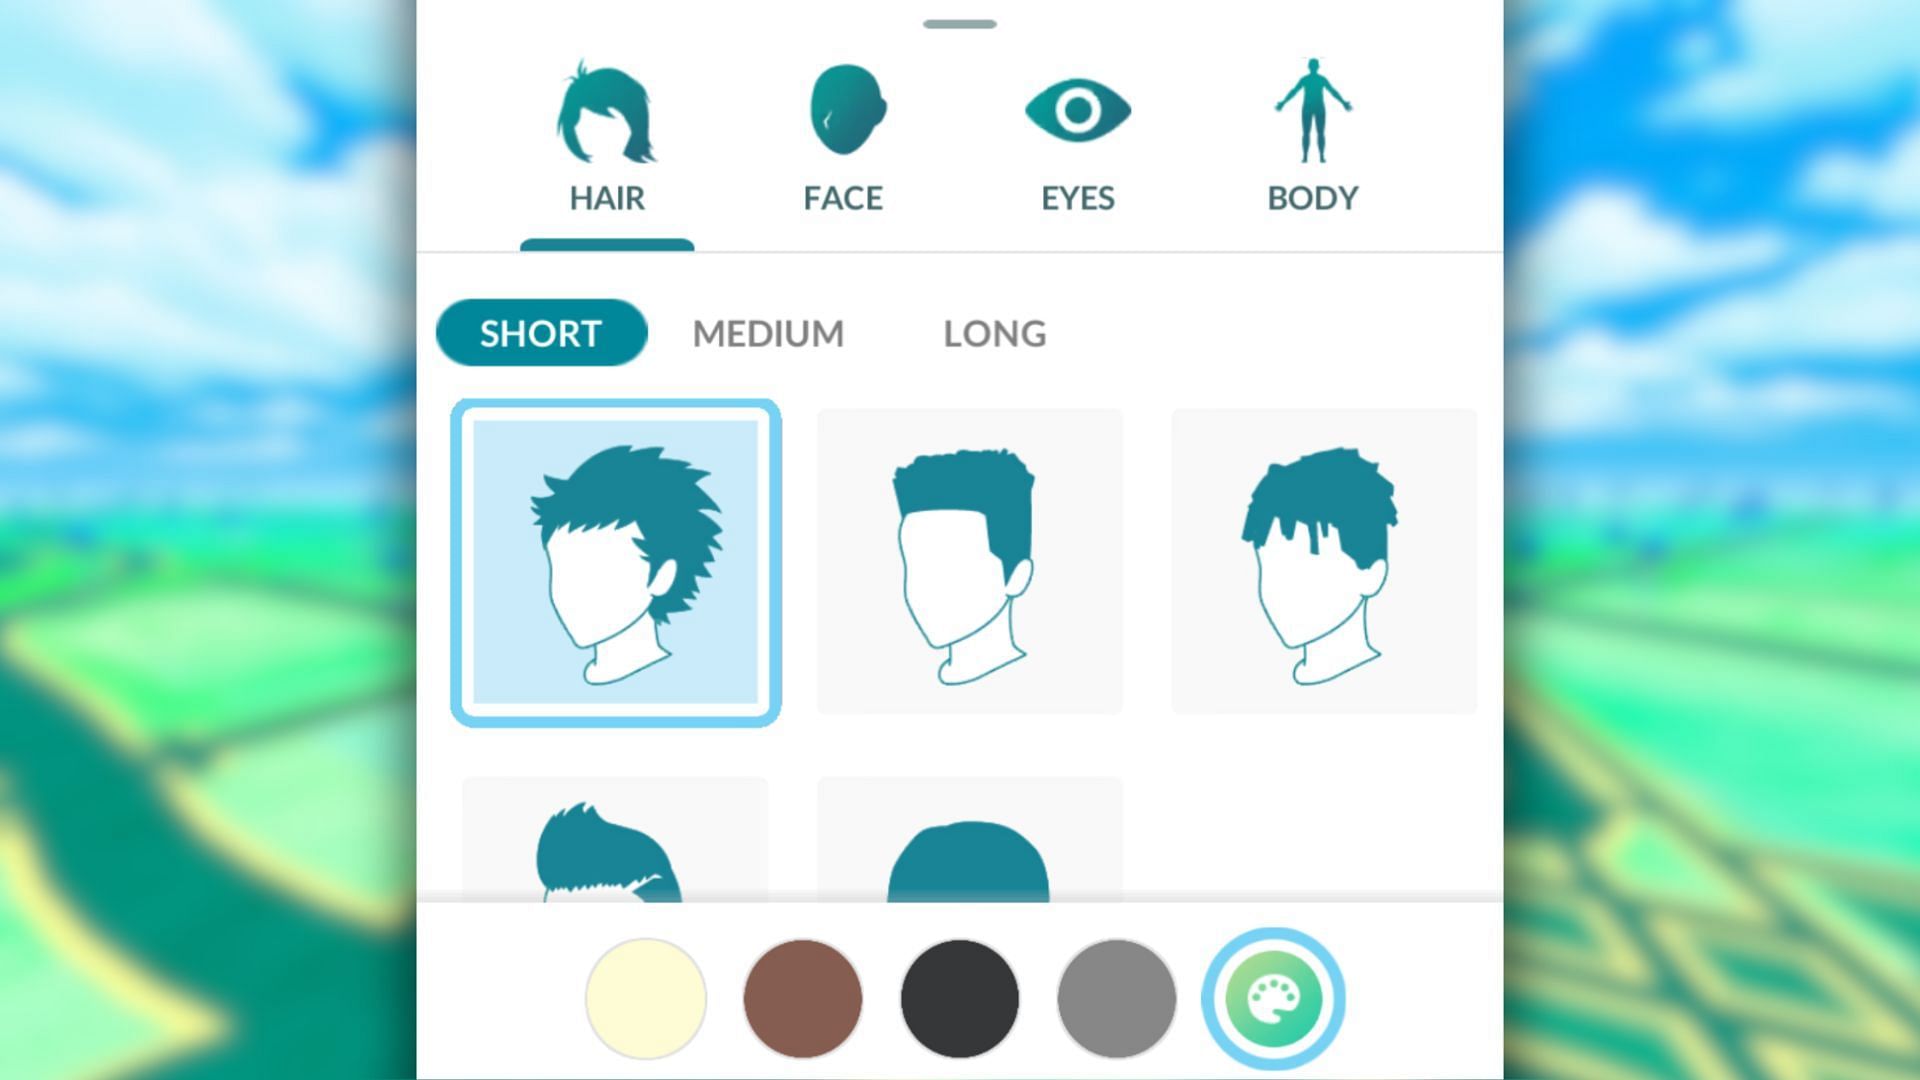 Hair presets available in the game (Image via The Pokemon Company)